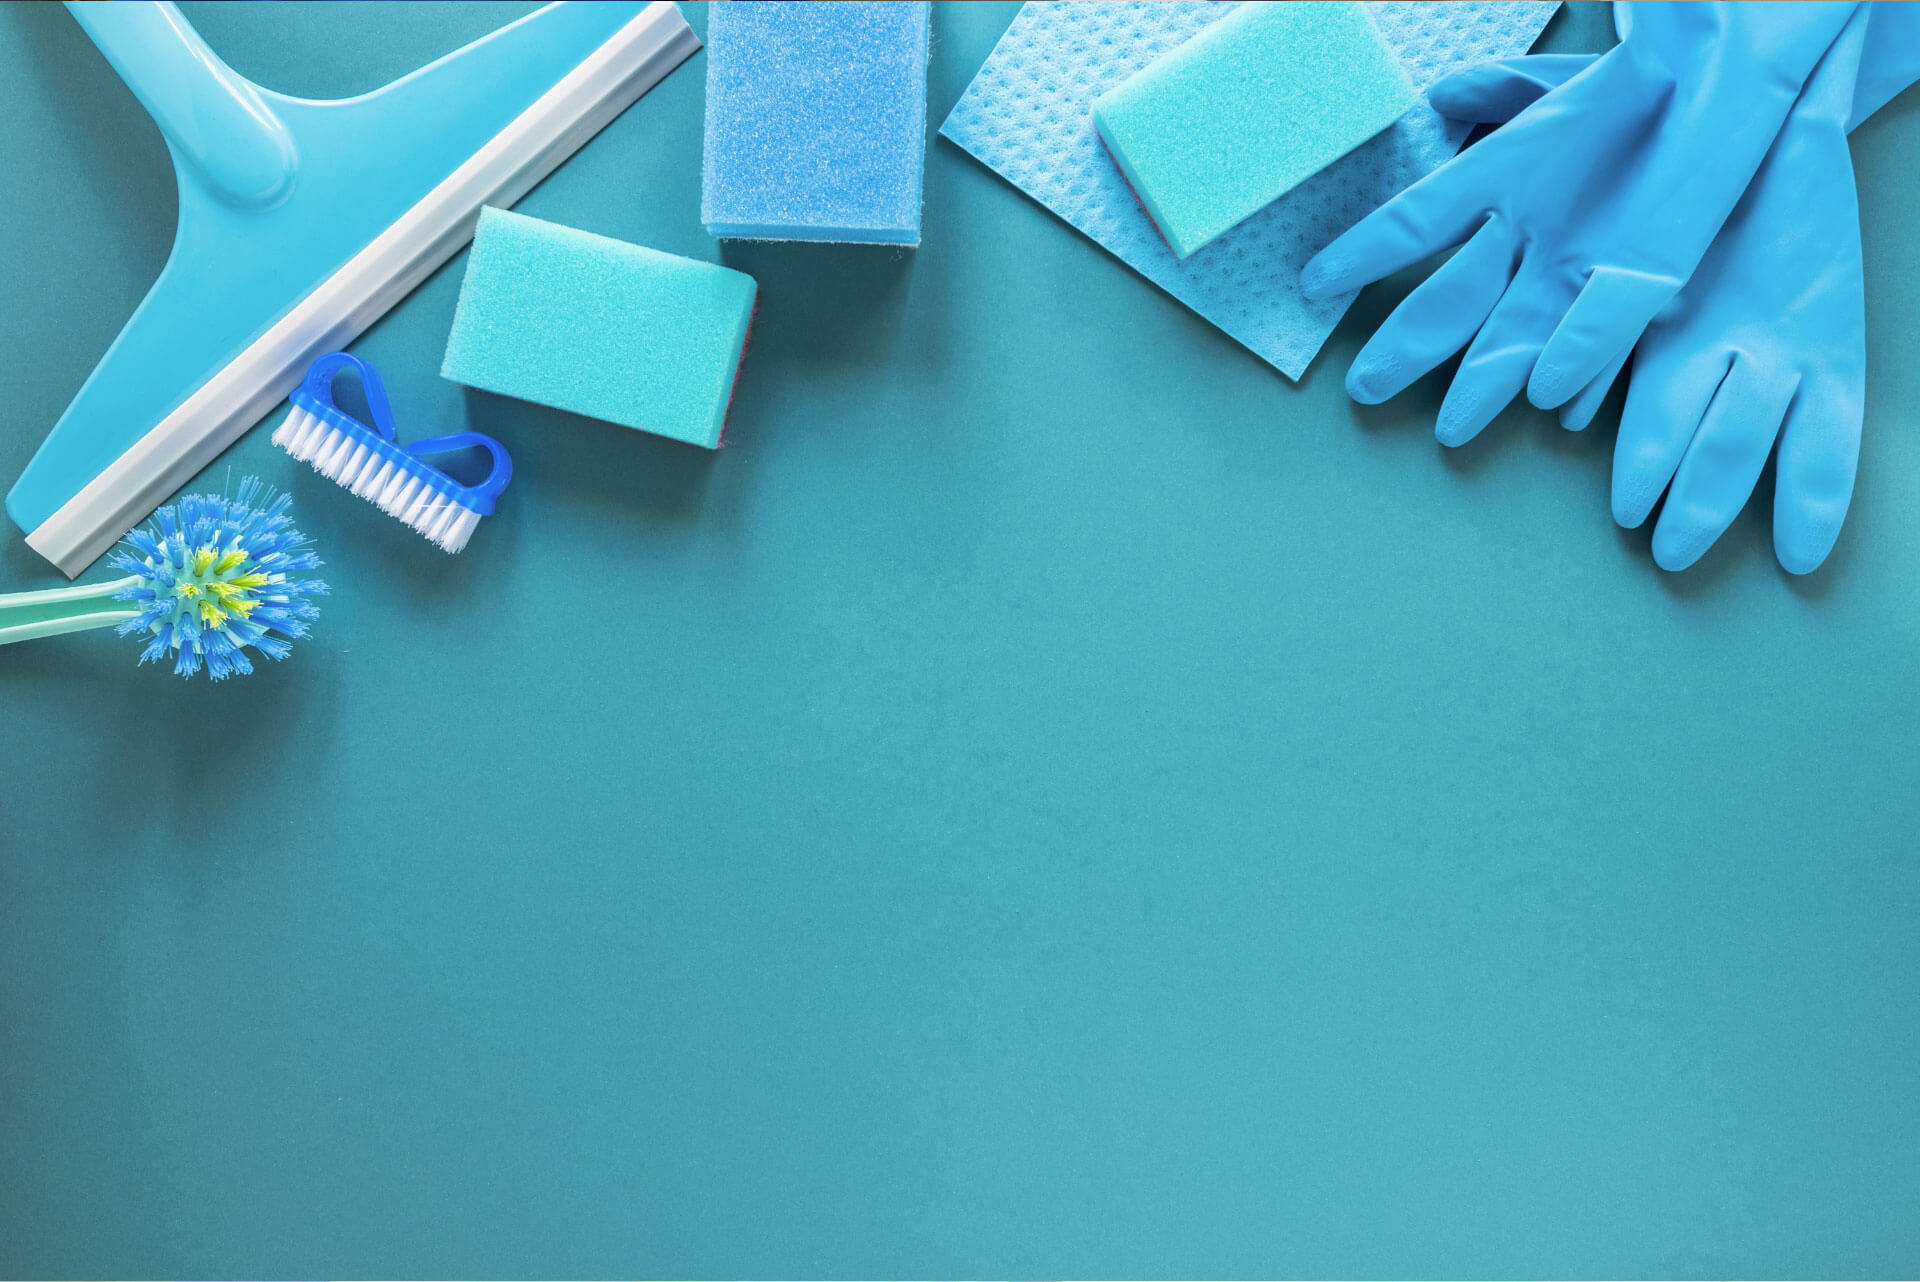 Cleaning supplies with a touch of blue on a turquoise background.